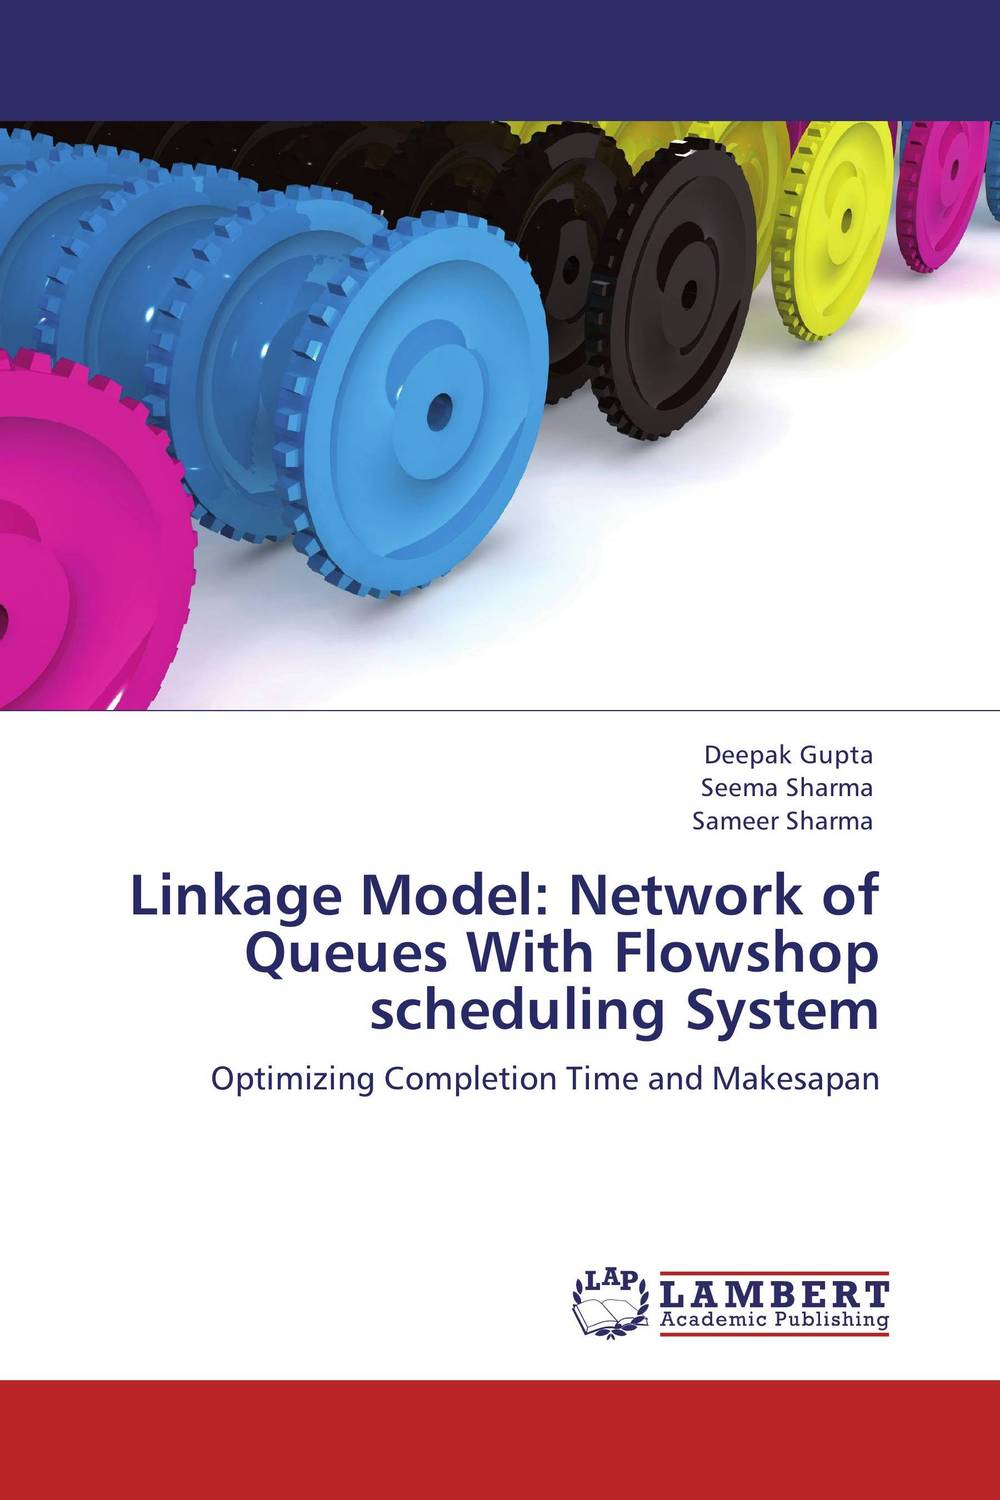 Linkage Model: Network of Queues With Flowshop scheduling System